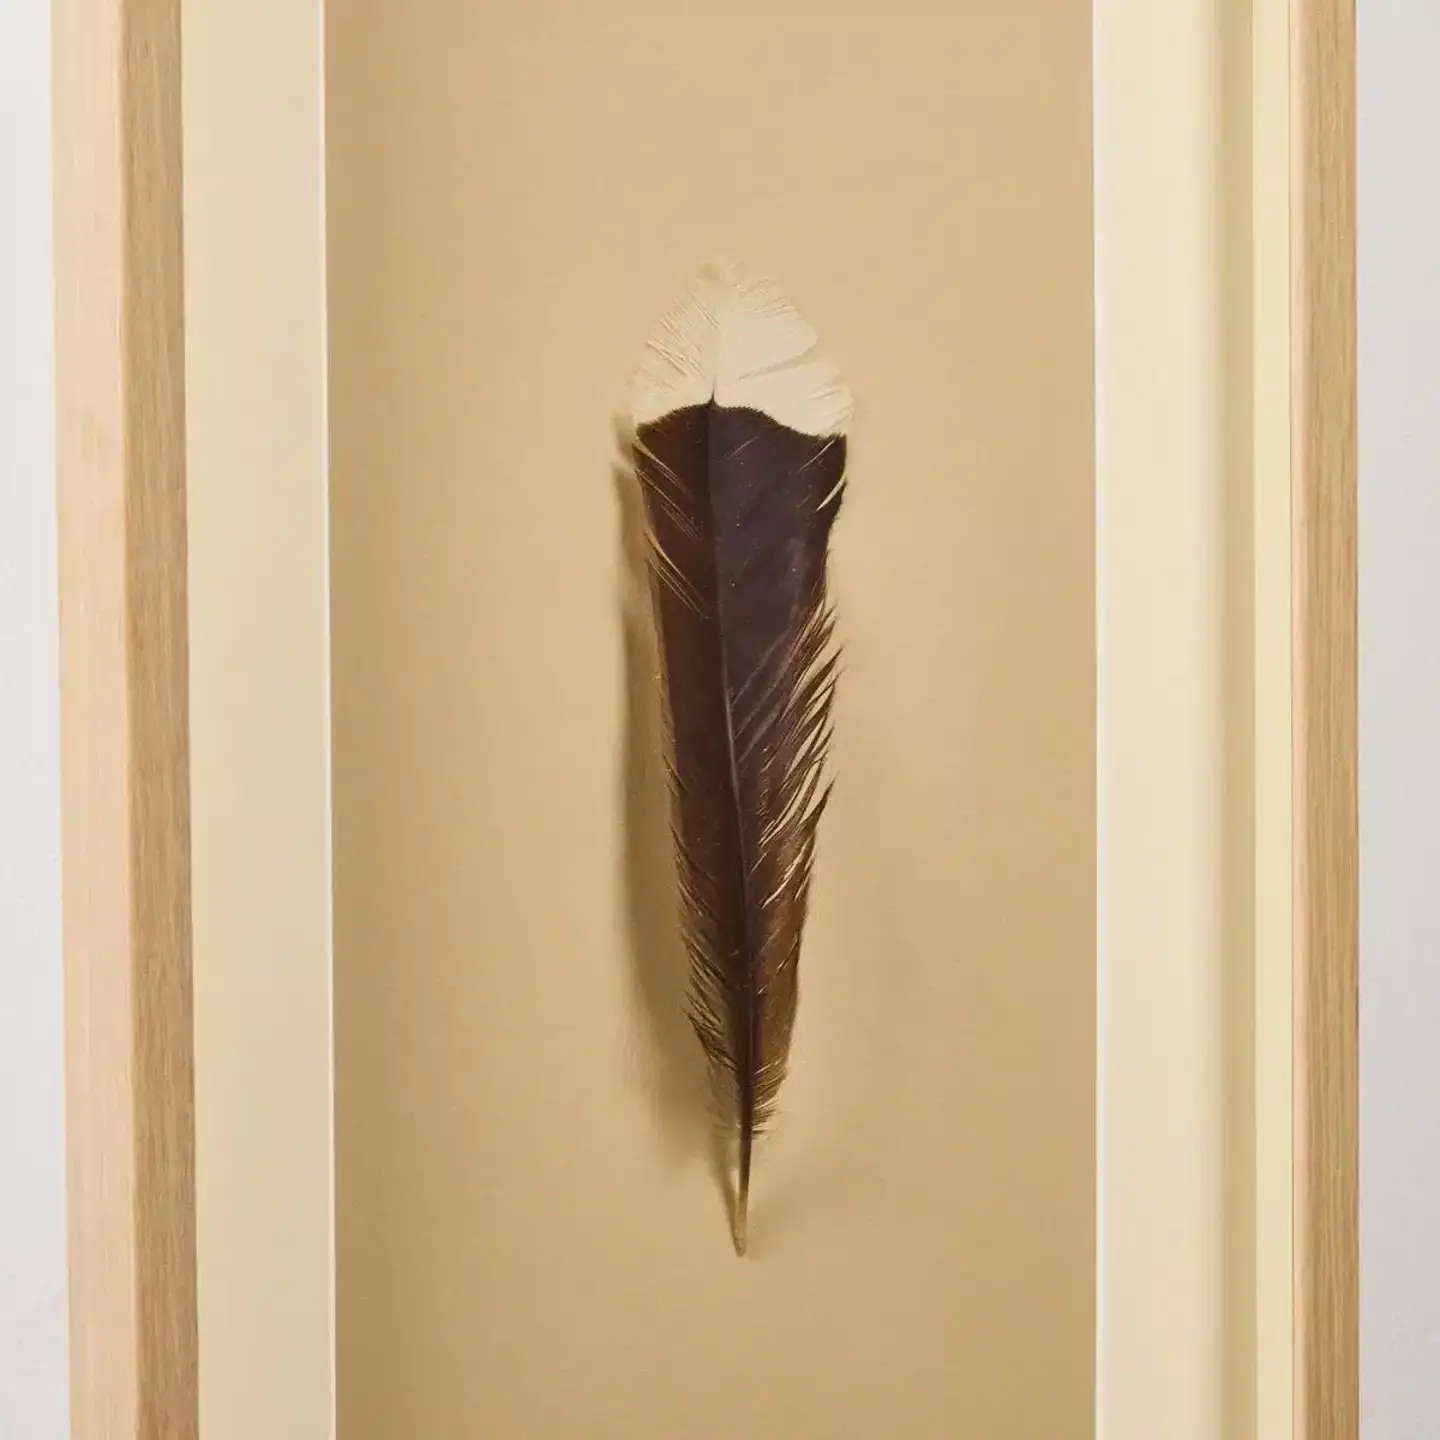 The tail feather weighs just nine grams. (Webb's Auction House)